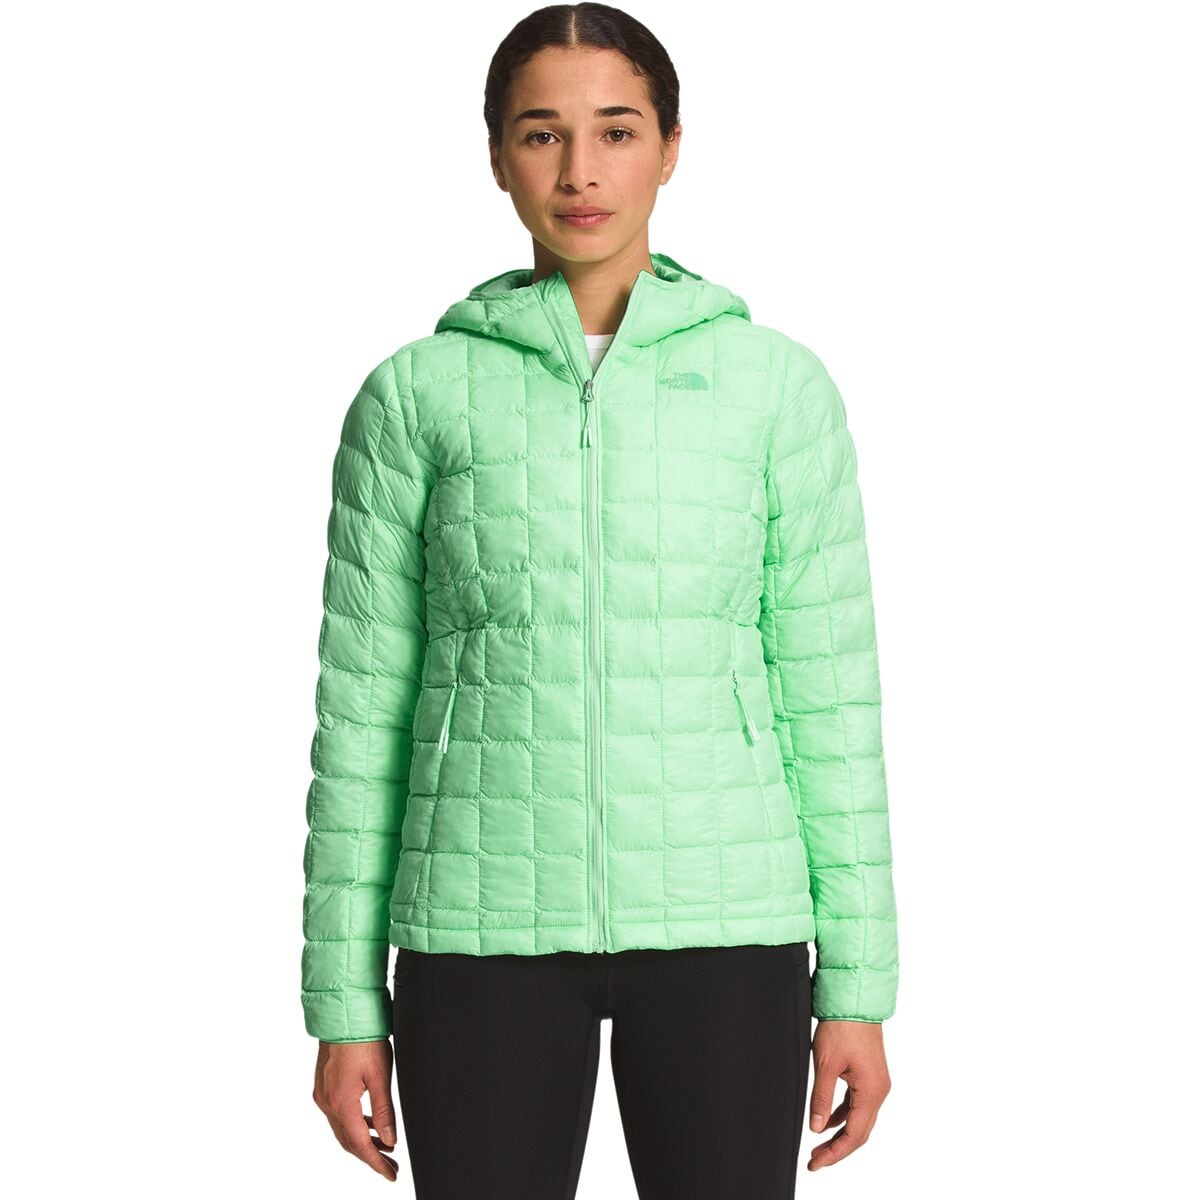 The north face Thermoball Jacket women’s - www.weeklybangalee.com